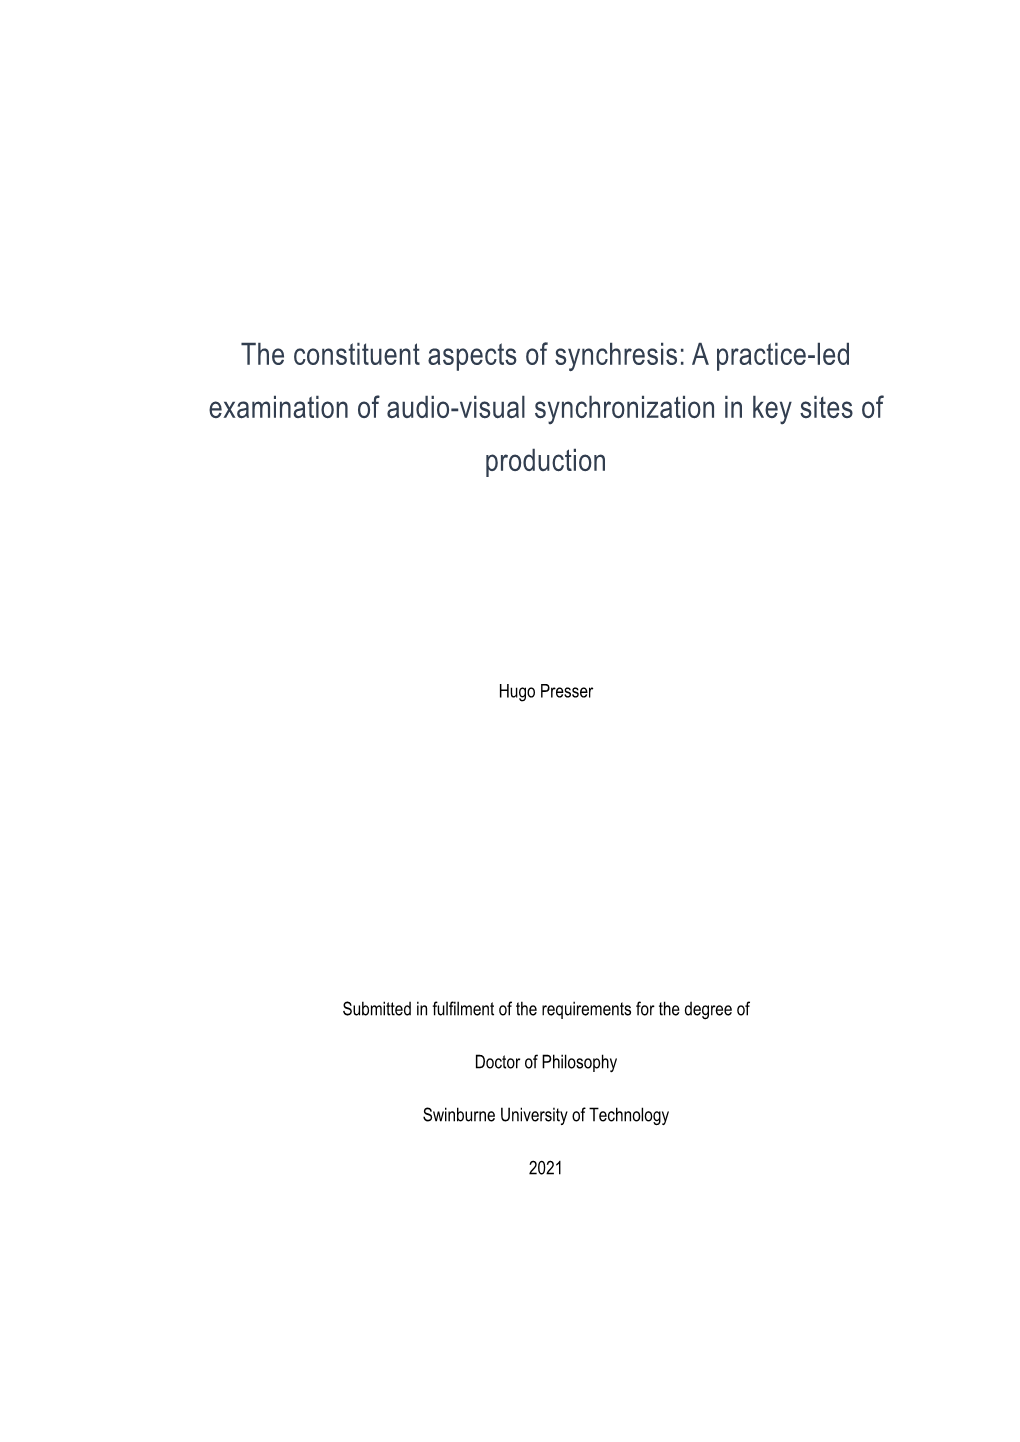 The Constituent Aspects of Synchresis: a Practice-Led Examination of Audio-Visual Synchronization in Key Sites of Production